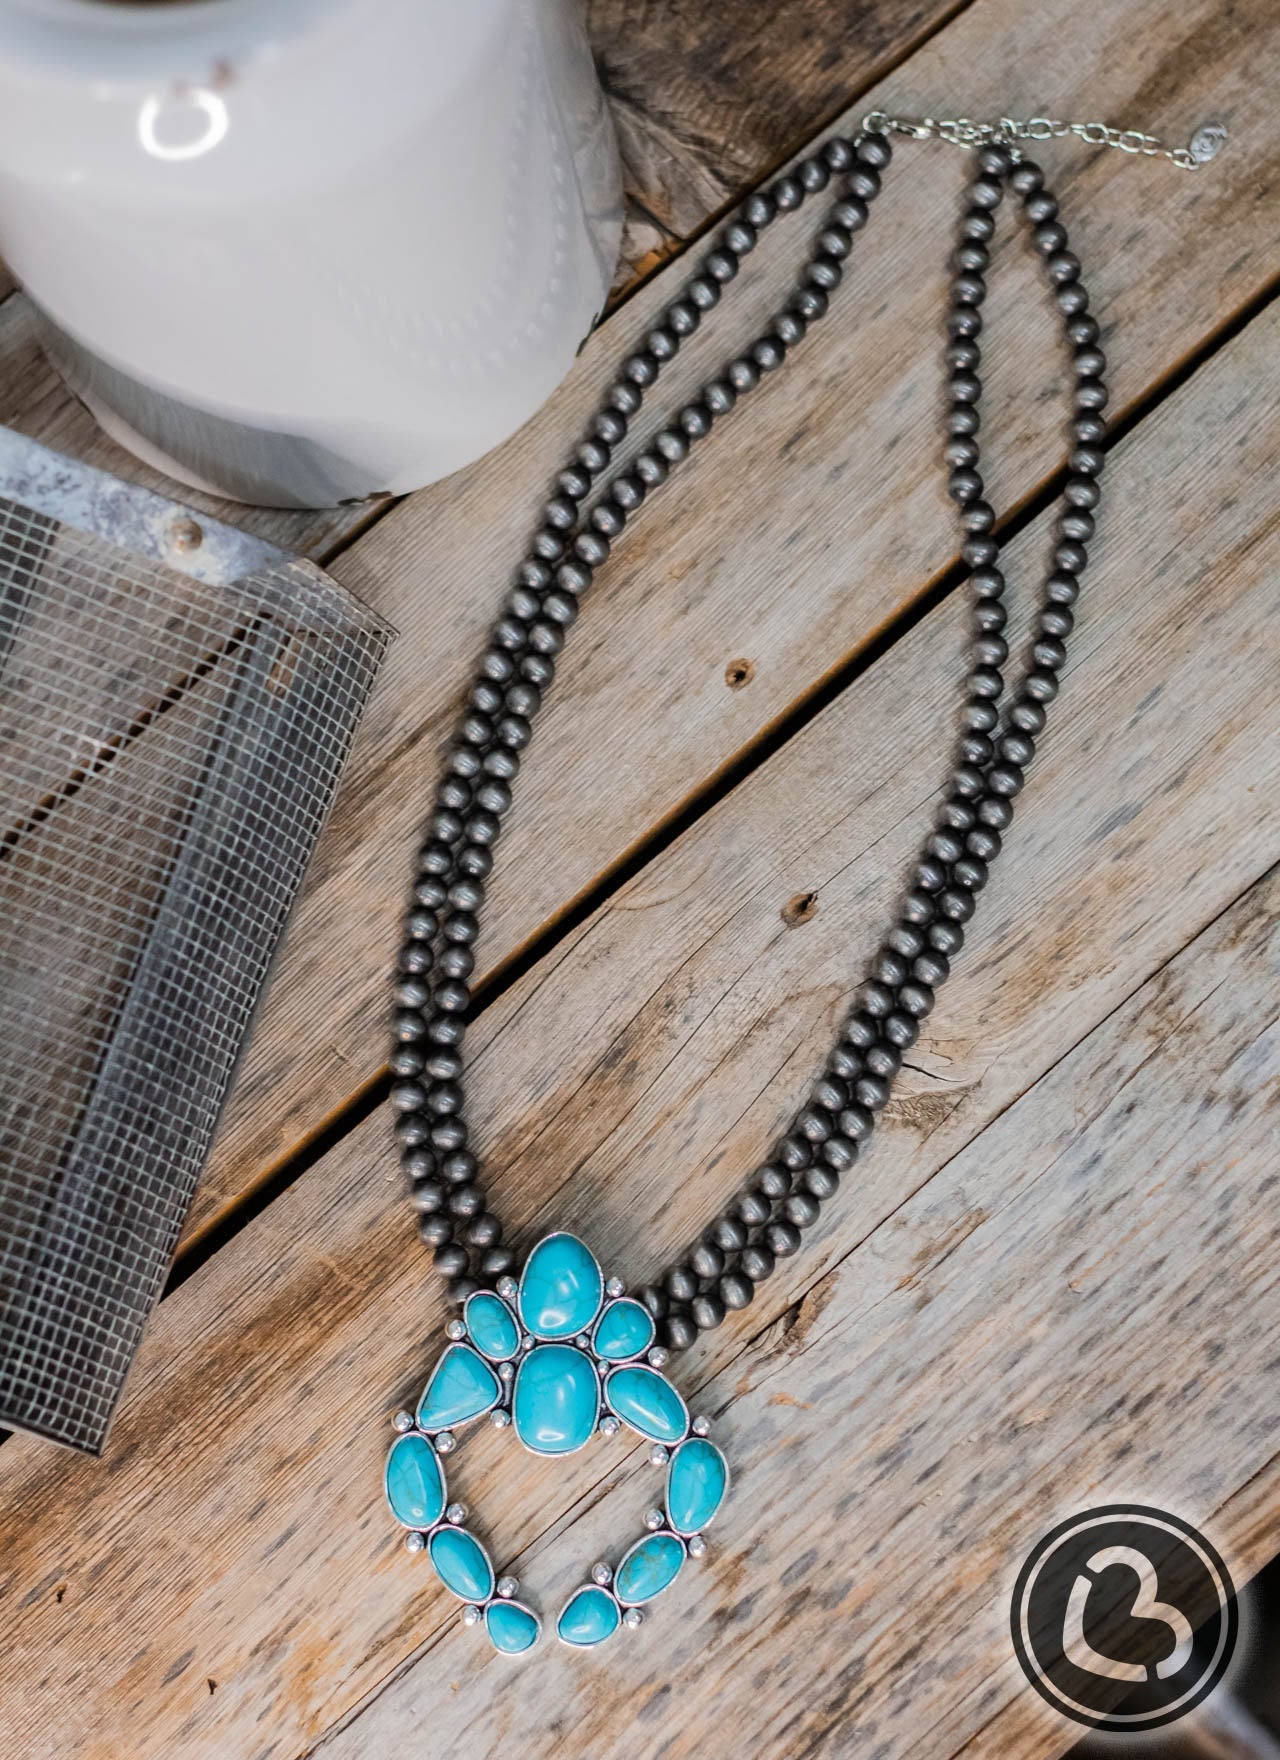 The Dustin Squash Blossom Necklace in Turquoise Jewelry 18 